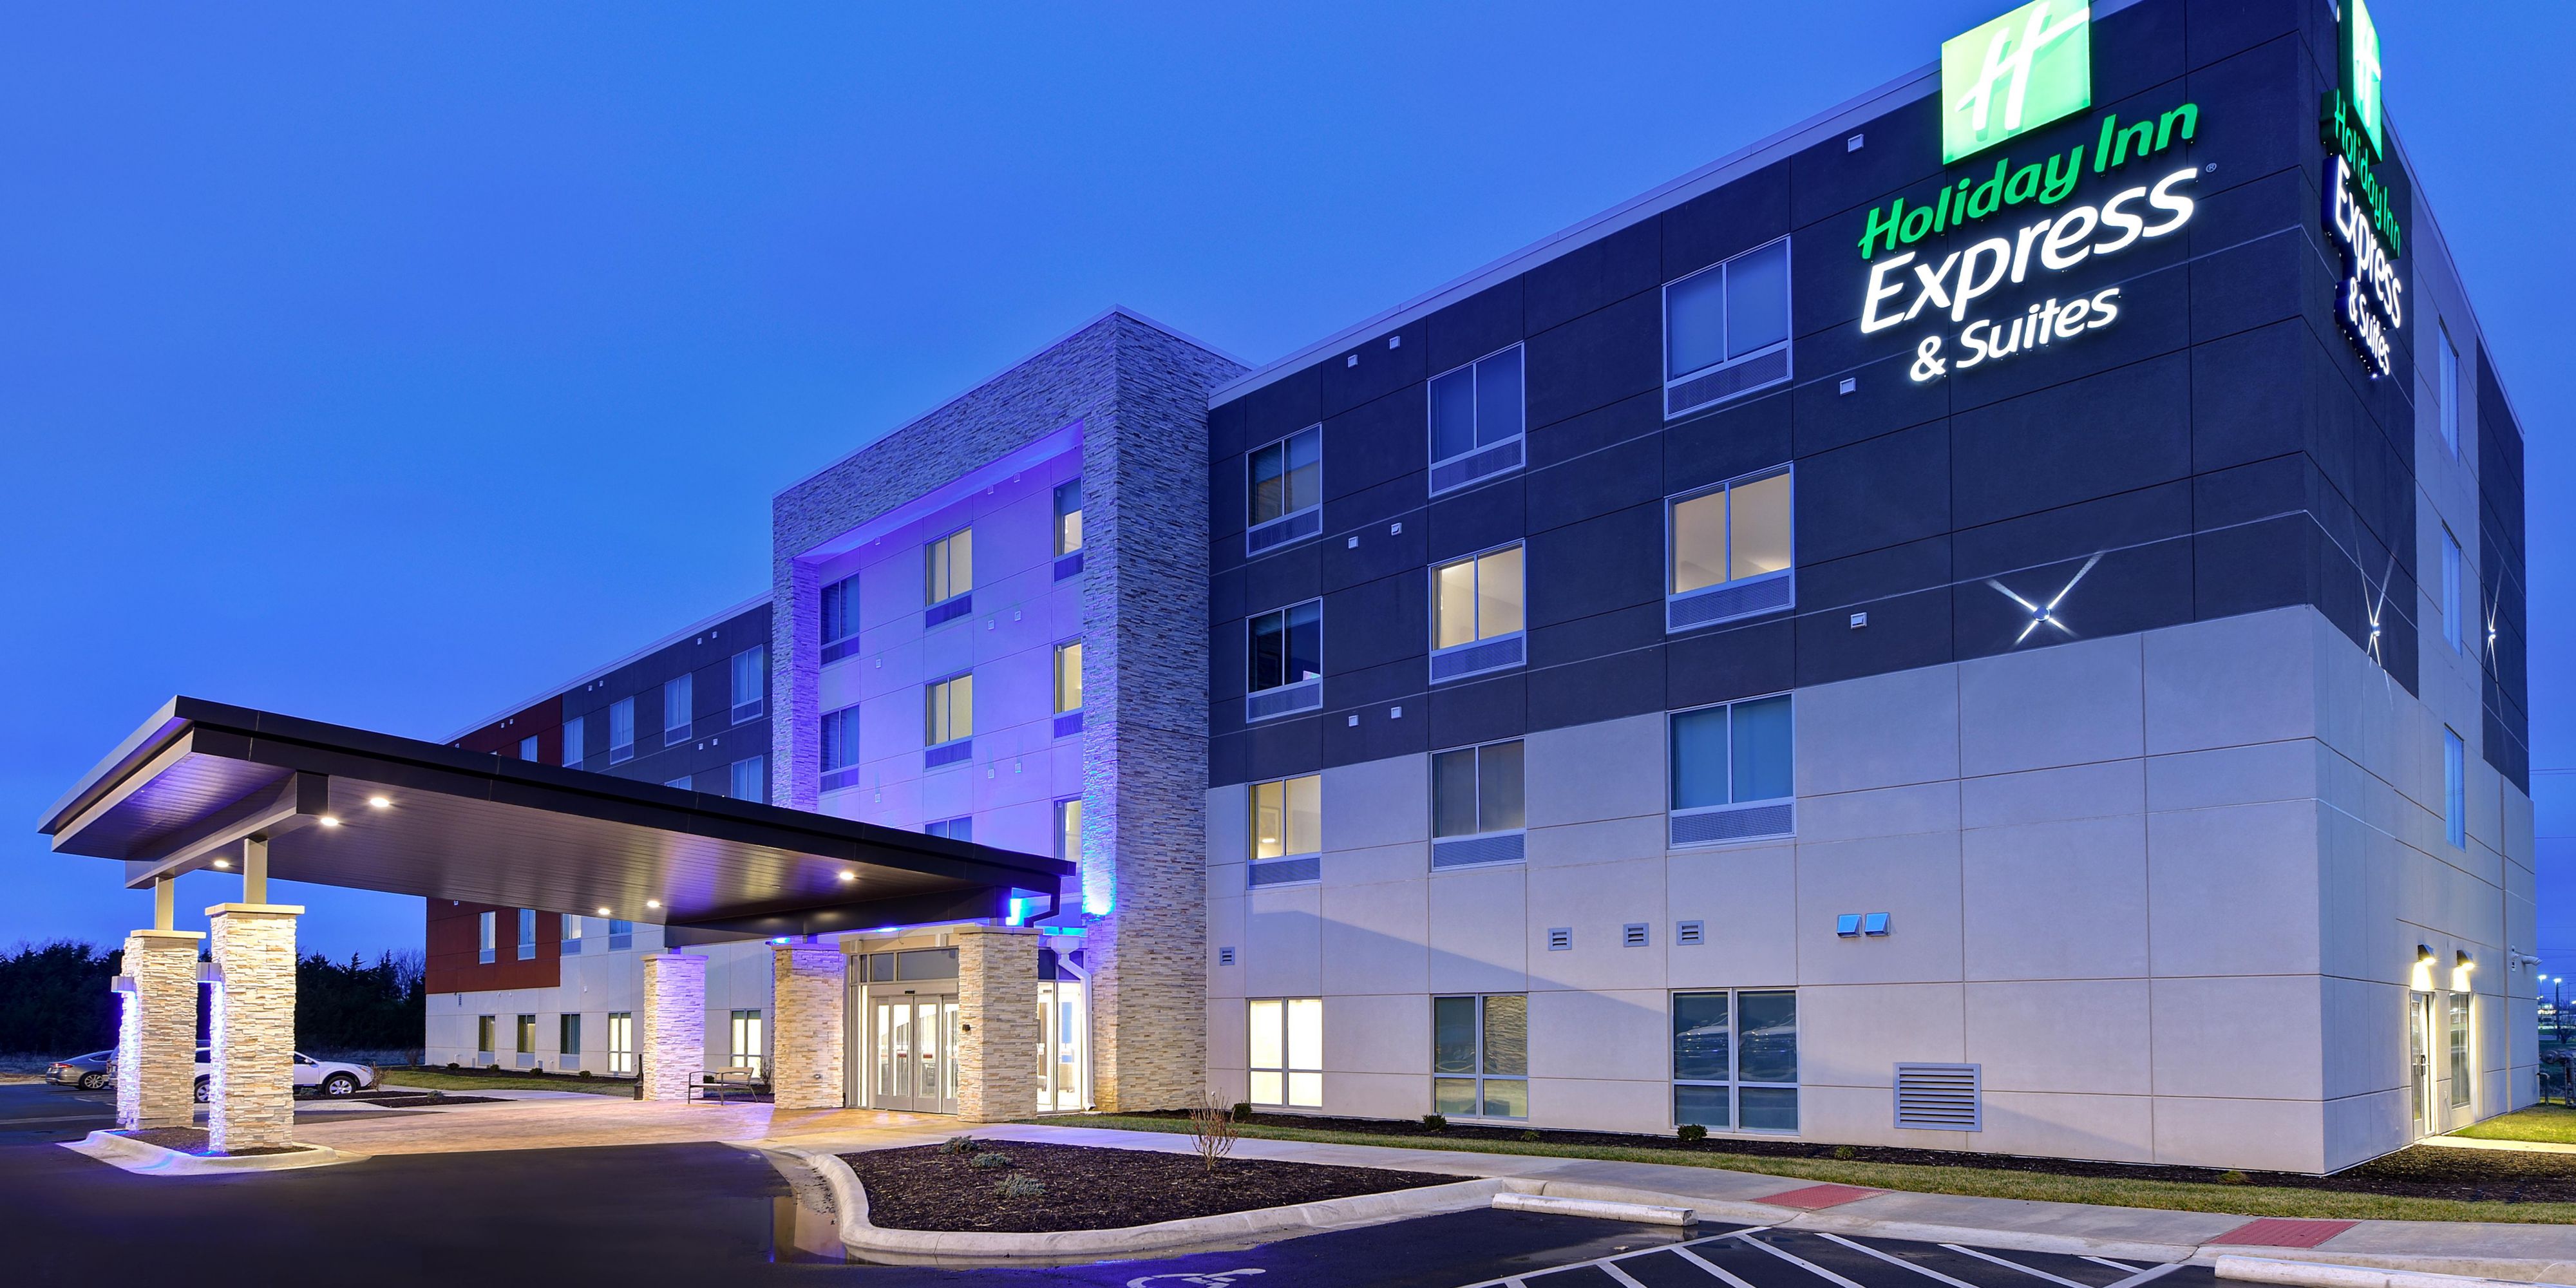 The Holiday Inn Express Ottawa is conveniently located right off of Interstate 35. We are less than and hour drive from Overland Park and Kansas City.